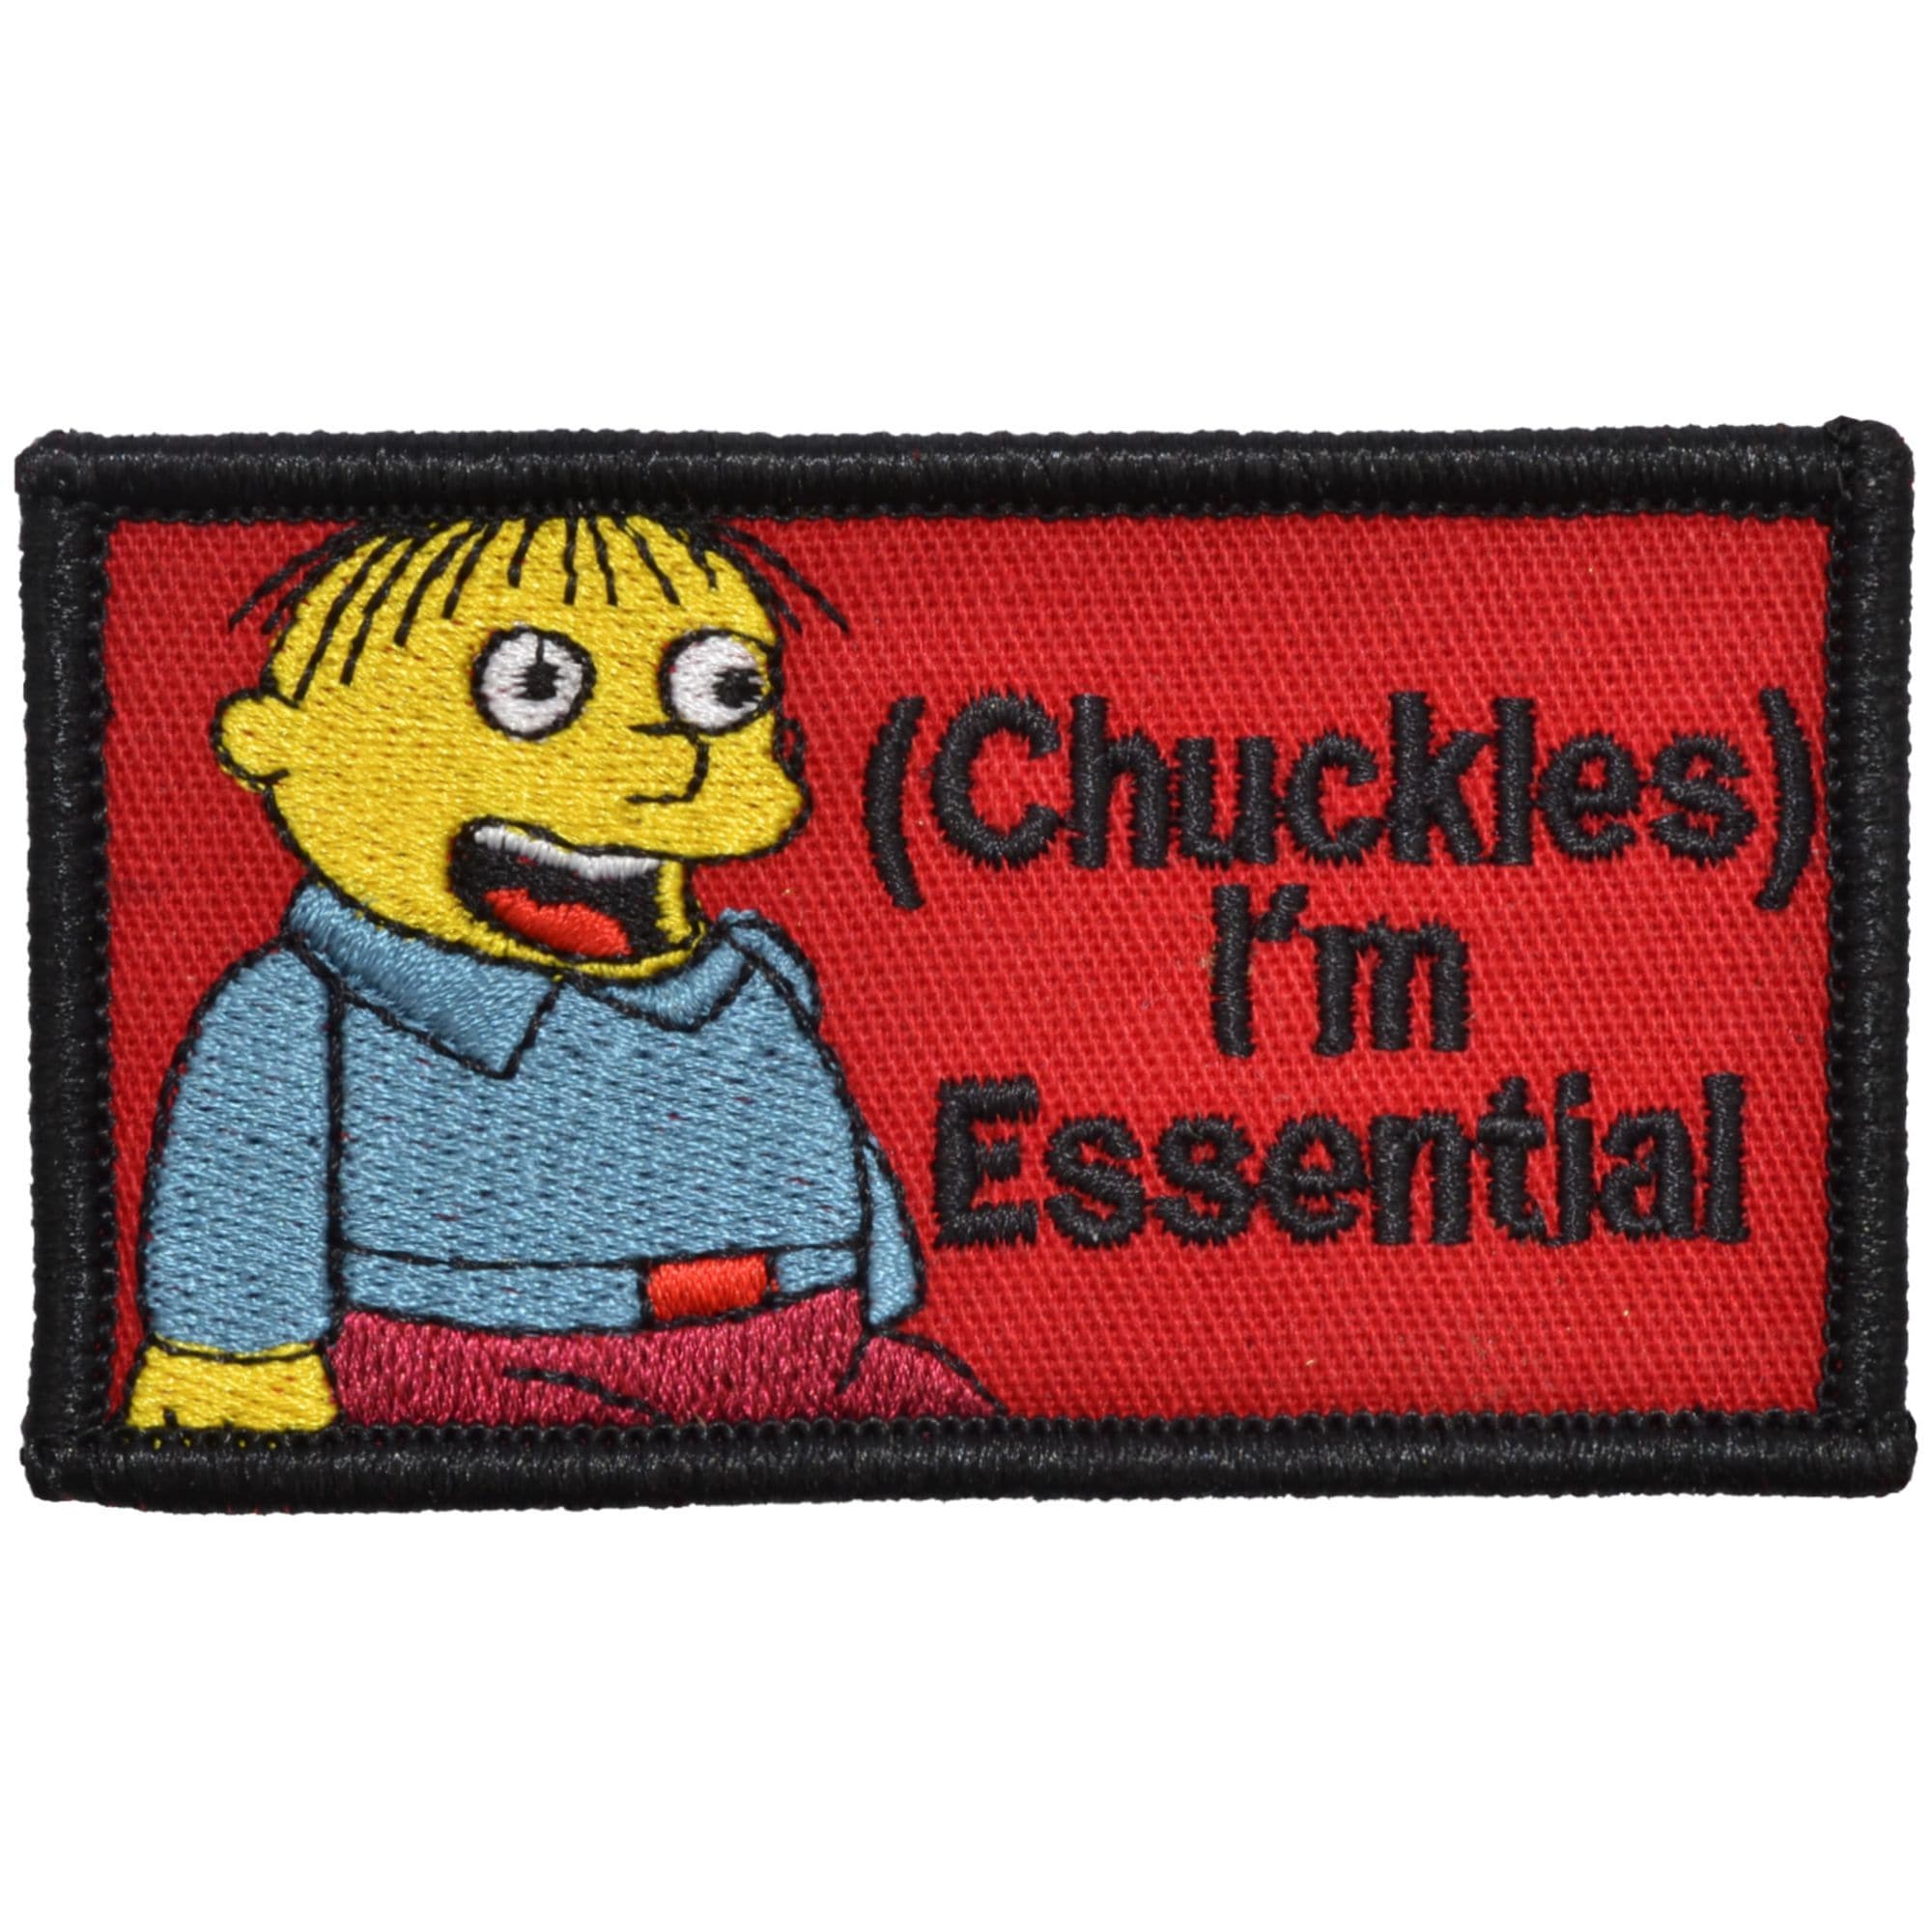 I'm a Militia Funny Morale Patch Hook and Loop Custom Patch 2x3